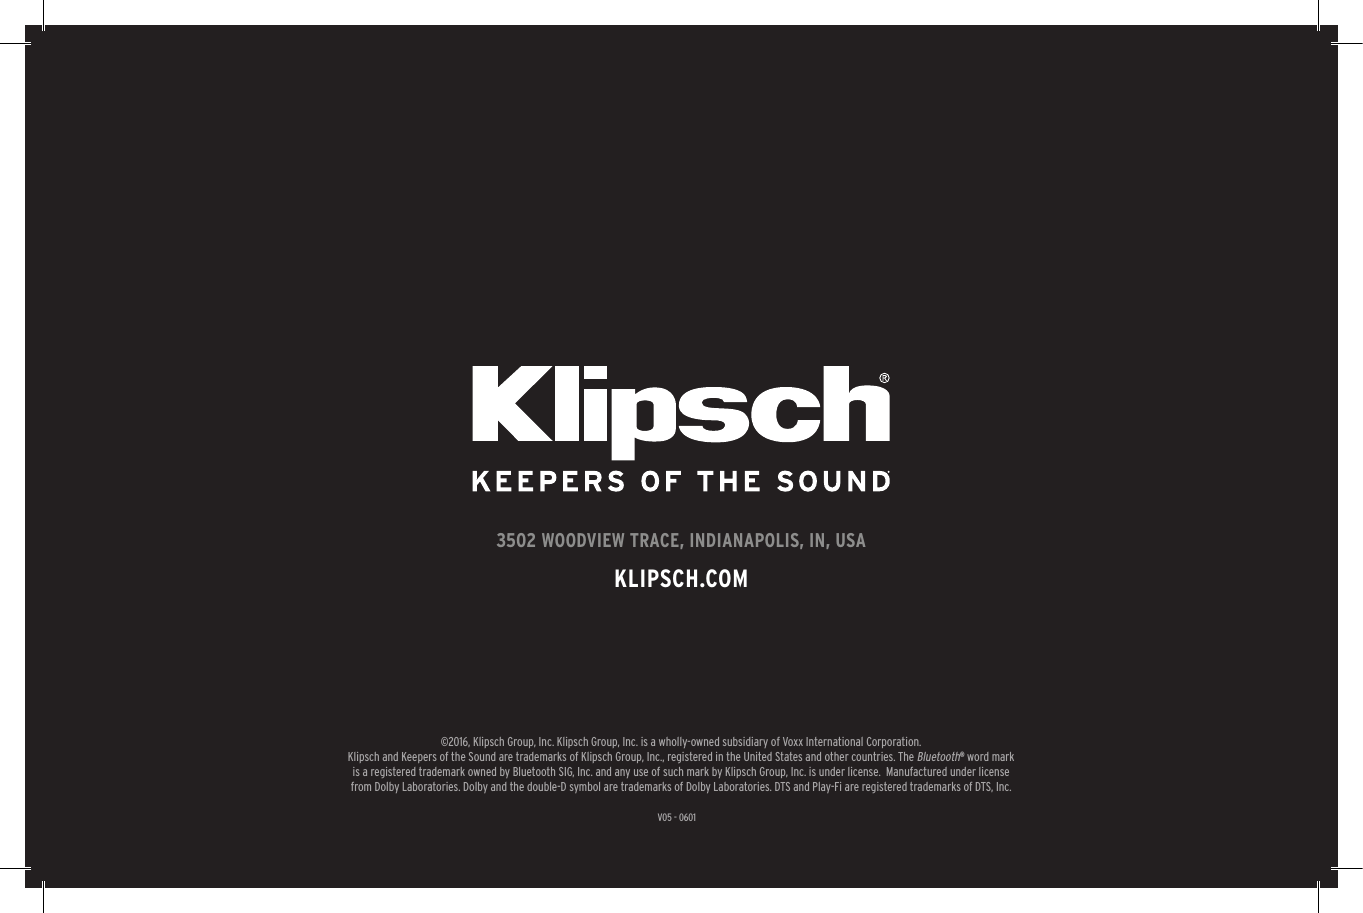 31V05 - 06013502 WOODVIEW TRACE, INDIANAPOLIS, IN, USAKLIPSCH.COM©2016, Klipsch Group, Inc. Klipsch Group, Inc. is a wholly-owned subsidiary of Voxx International Corporation.Klipsch and Keepers of the Sound are trademarks of Klipsch Group, Inc., registered in the United States and other countries. The Bluetooth® word mark is a registered trademark owned by Bluetooth SIG, Inc. and any use of such mark by Klipsch Group, Inc. is under license.  Manufactured under license from Dolby Laboratories. Dolby and the double-D symbol are trademarks of Dolby Laboratories. DTS and Play-Fi are registered trademarks of DTS, Inc.